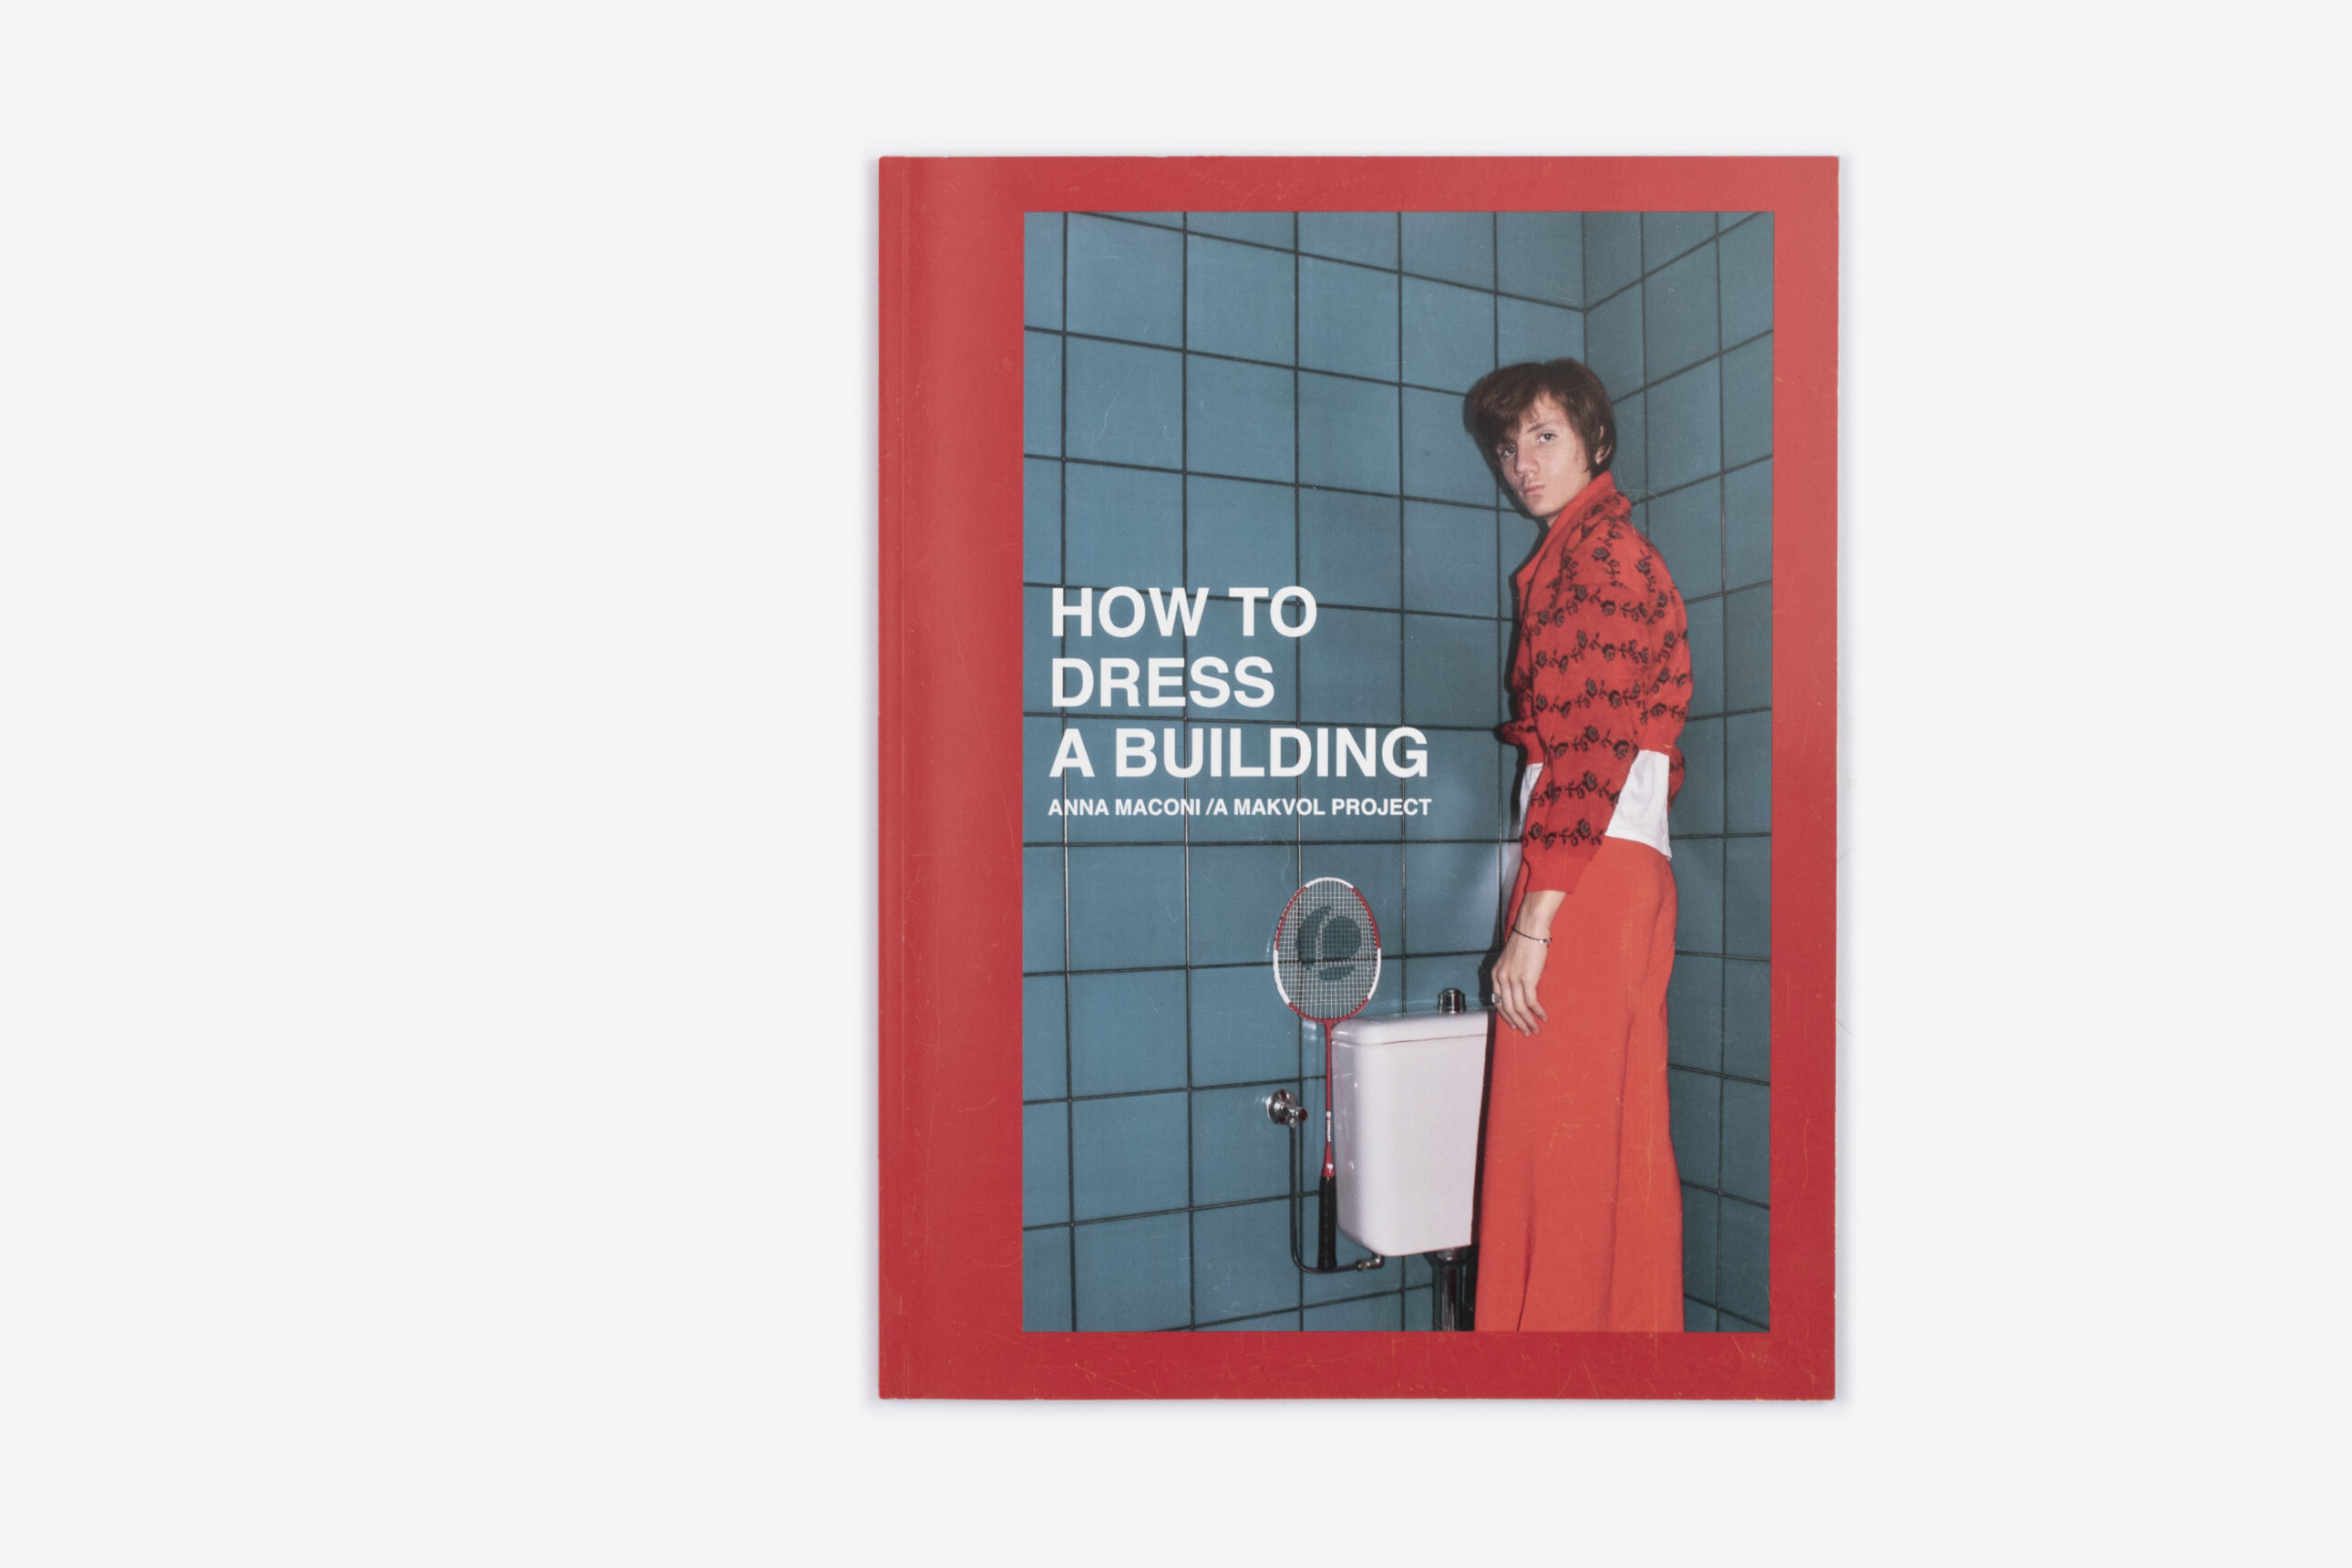 How to dress a building